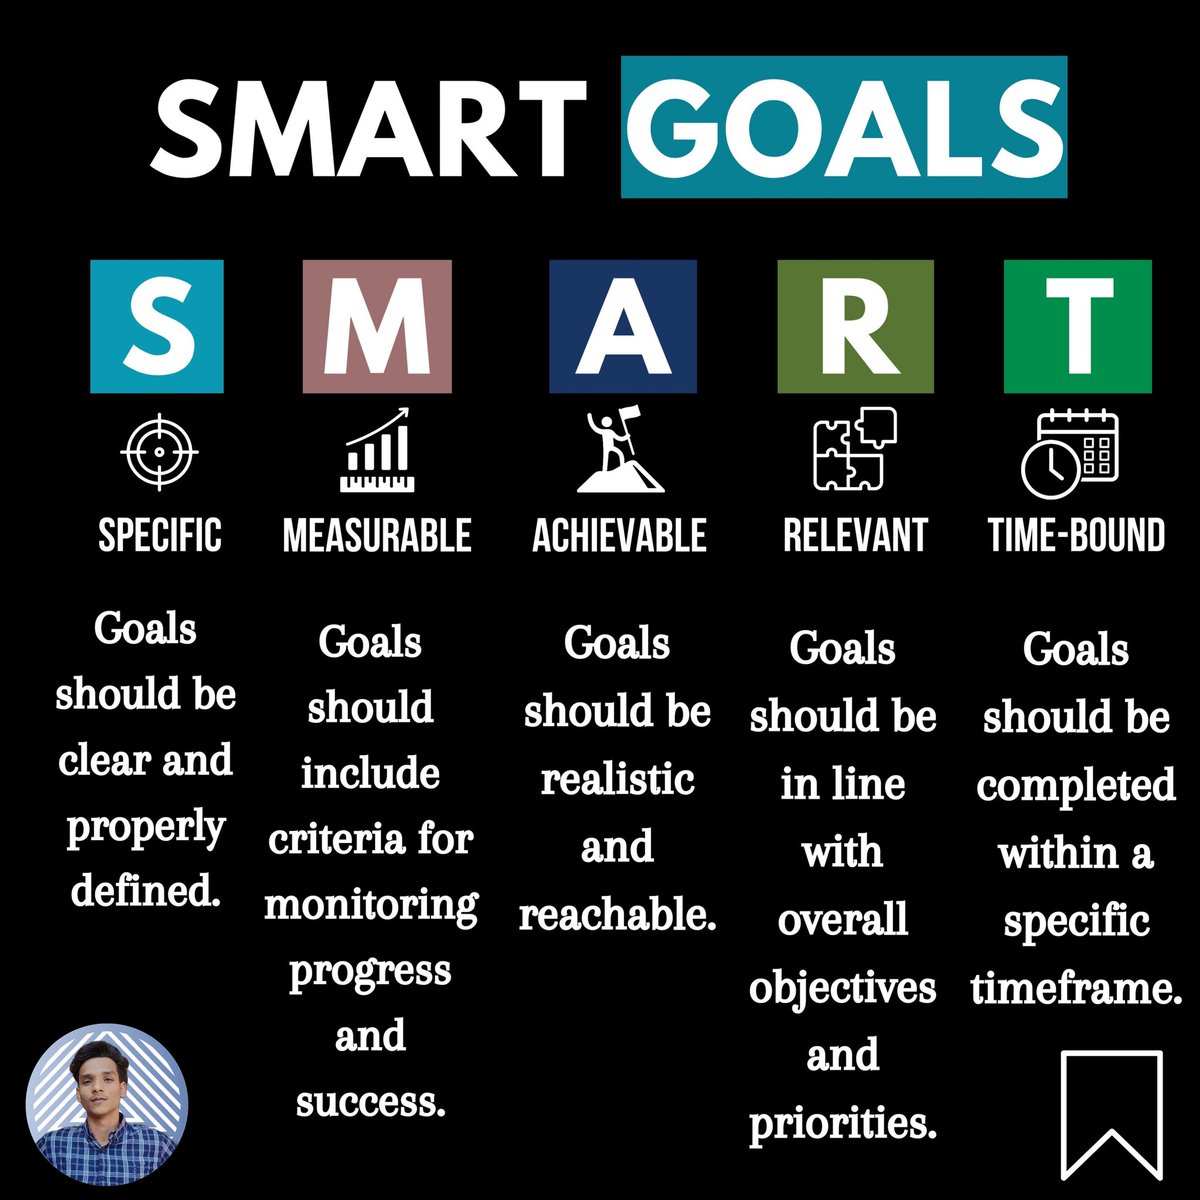 Though not all goals are made equal, setting goals is essential for both professional and personal development. With their emphasis on attainable results, clarity, and focus, SMART goals offer a framework for successful goal-setting.
#smartgoals 
#motivation 
#life